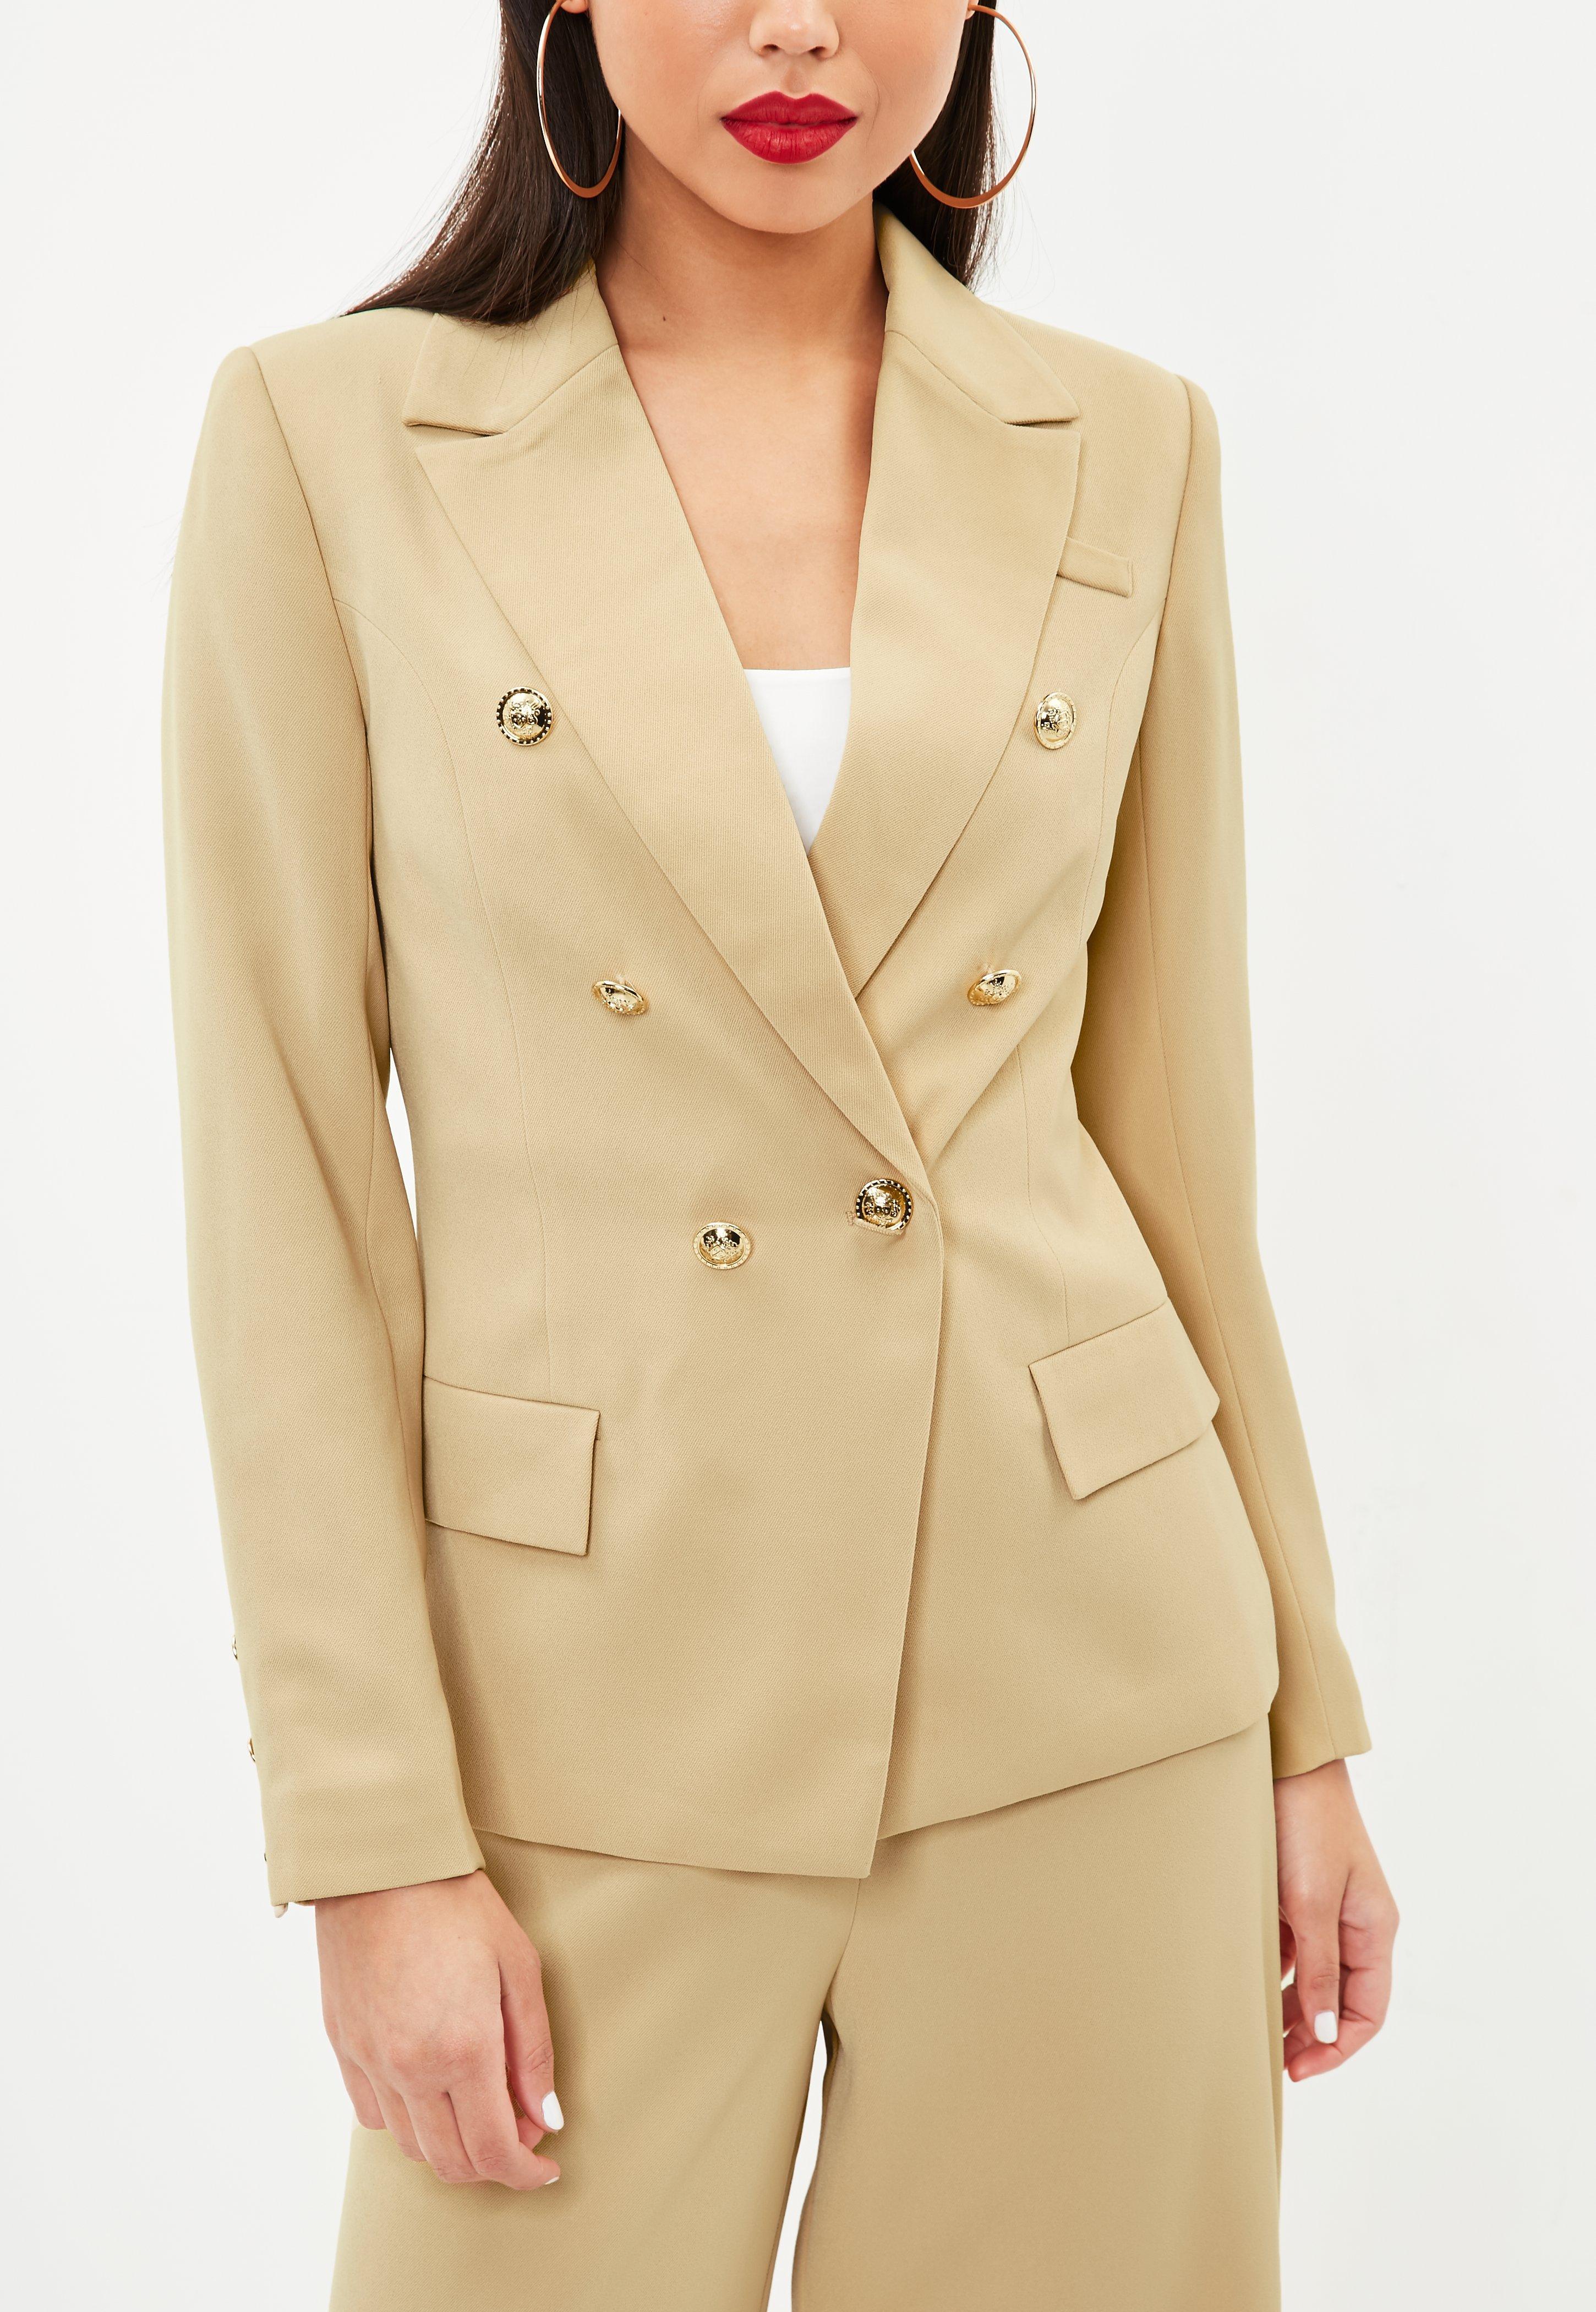 Lyst - Missguided Camel Military Blazer in Natural